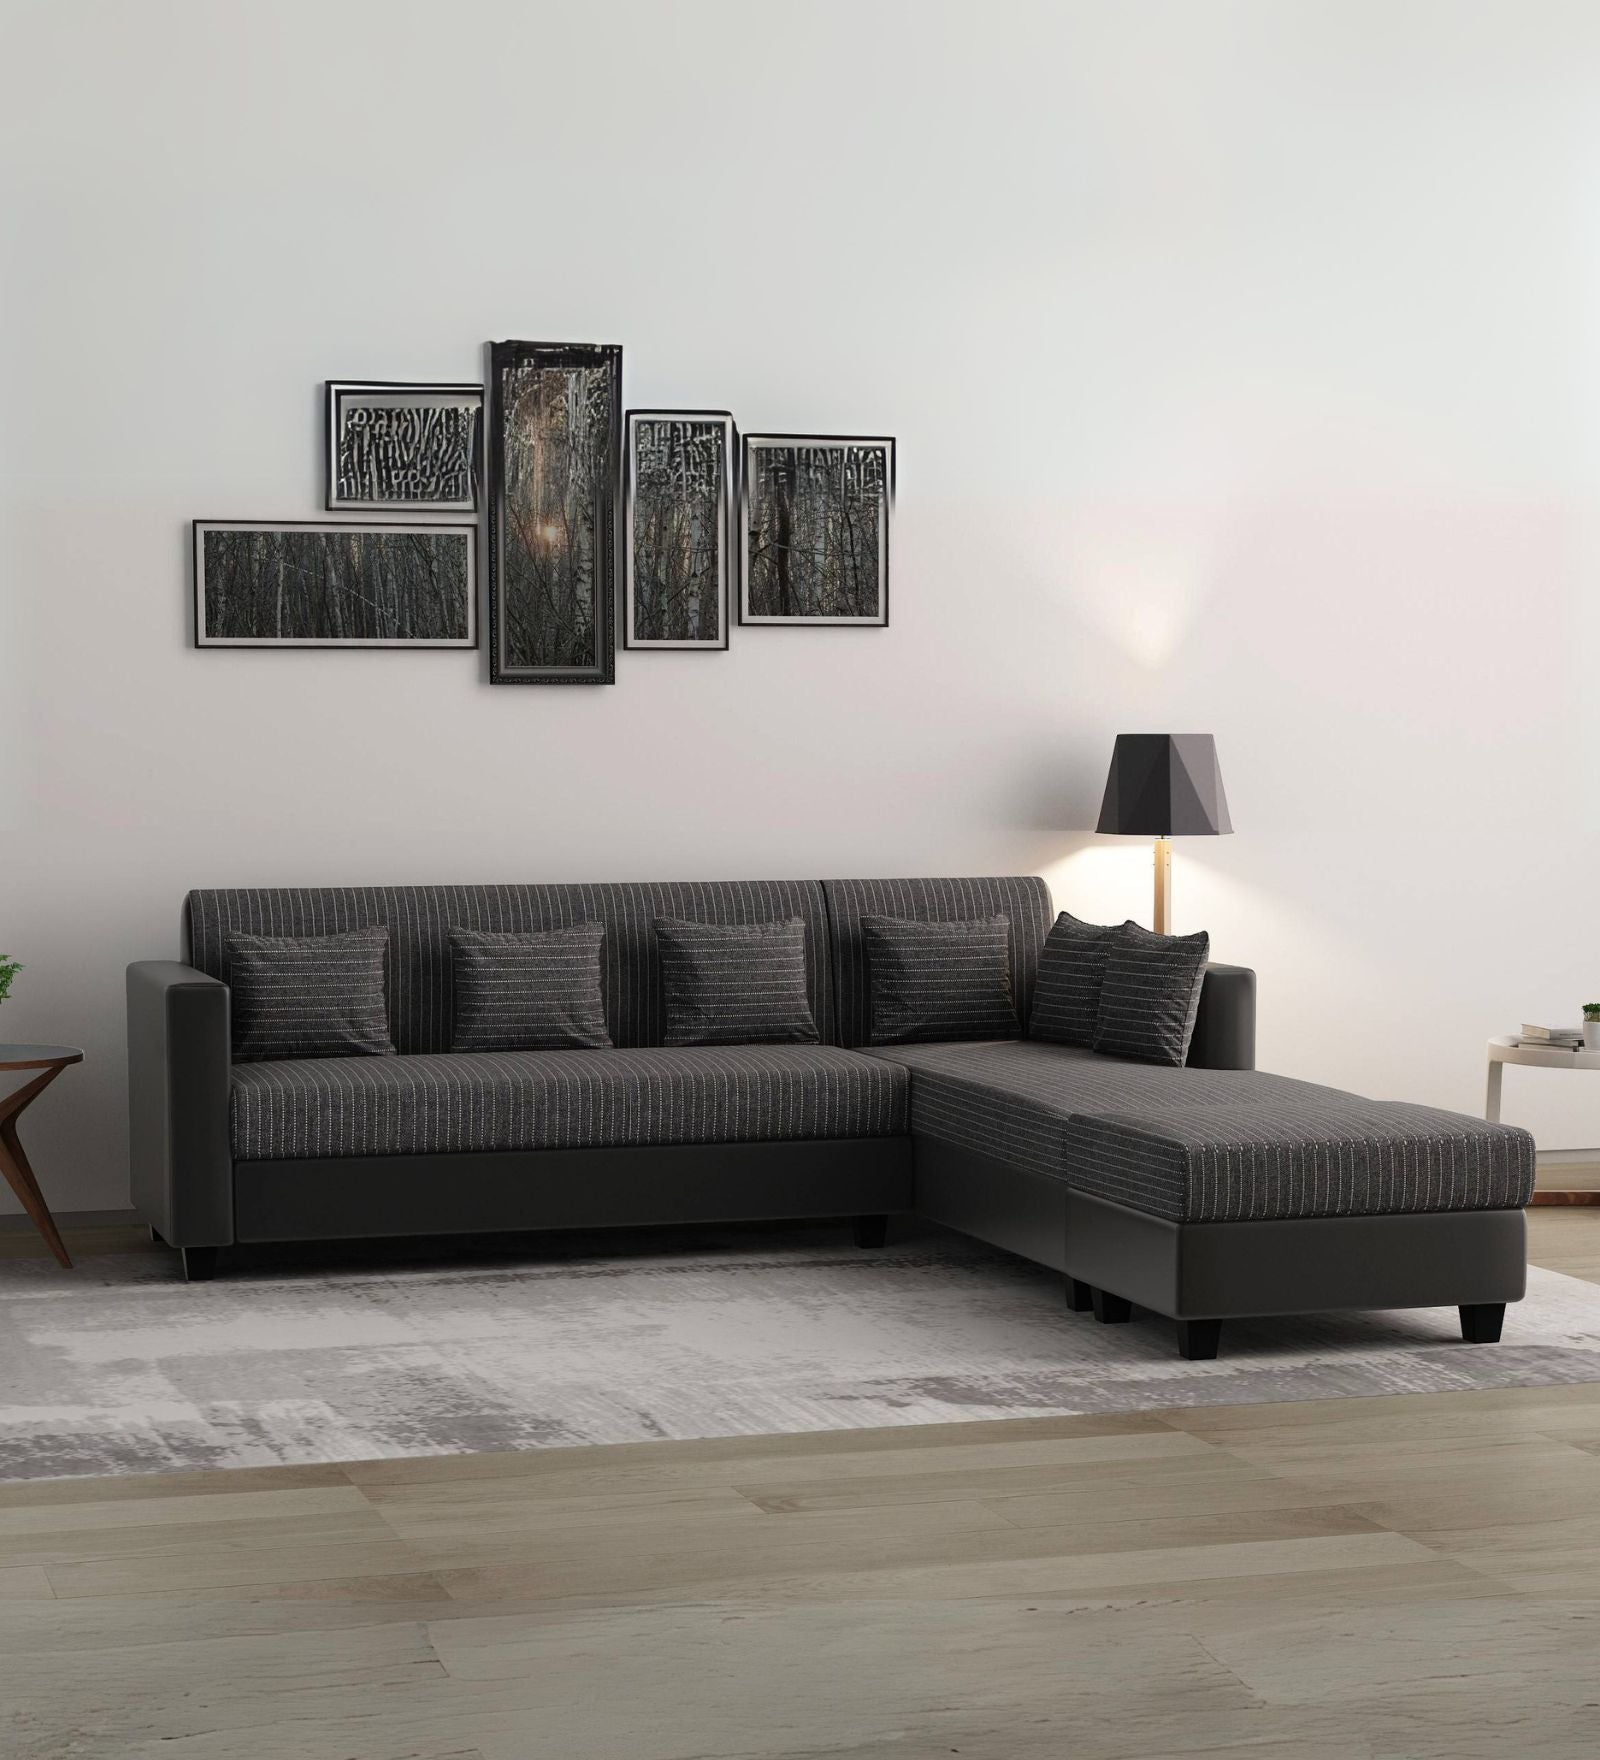 Baley Fabric LHS Sectional Sofa (3 + Lounger) In Lama Black Colour